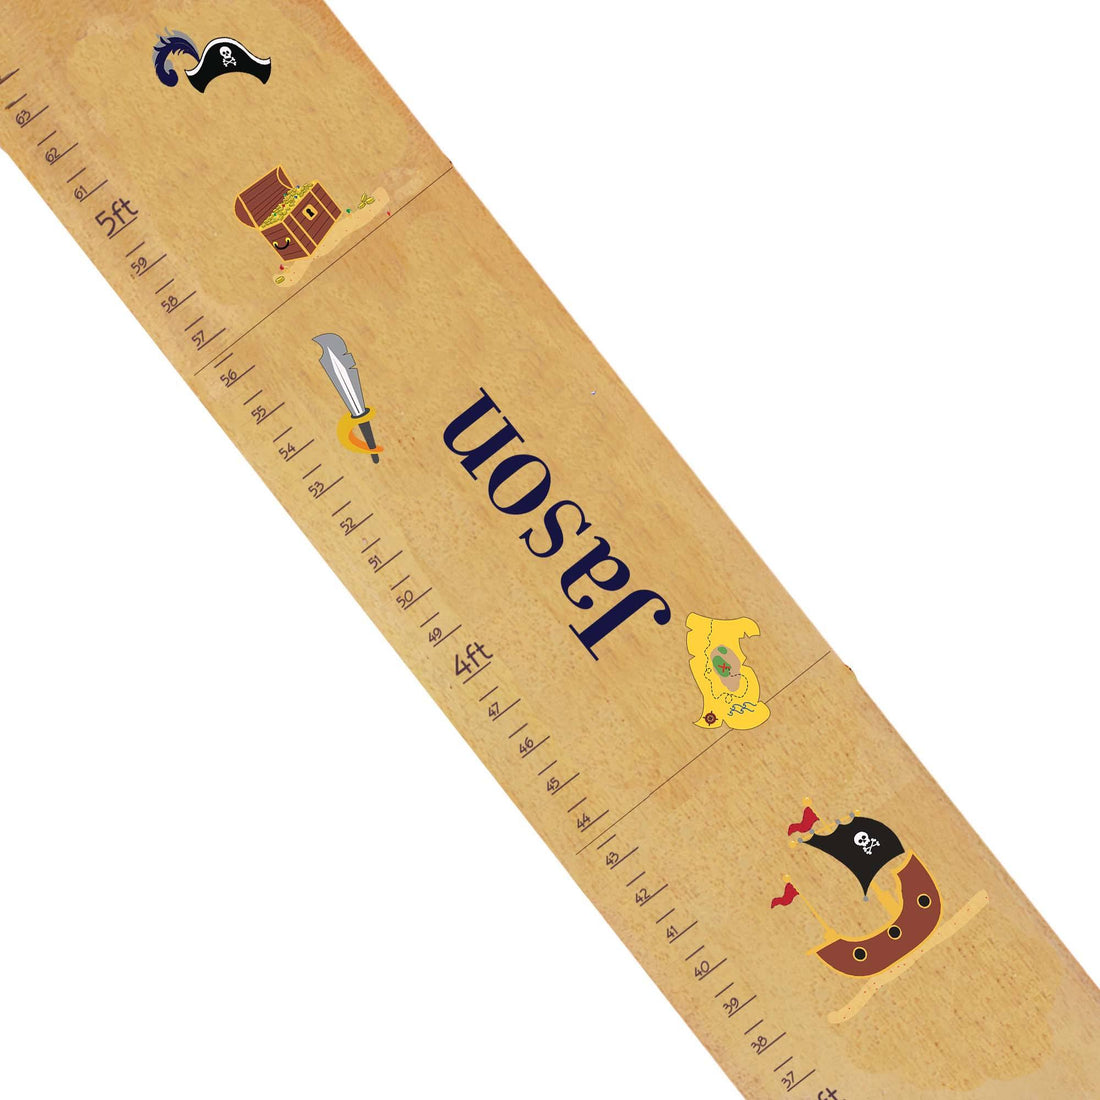 Personalized Natural Growth Chart With Pirates Design